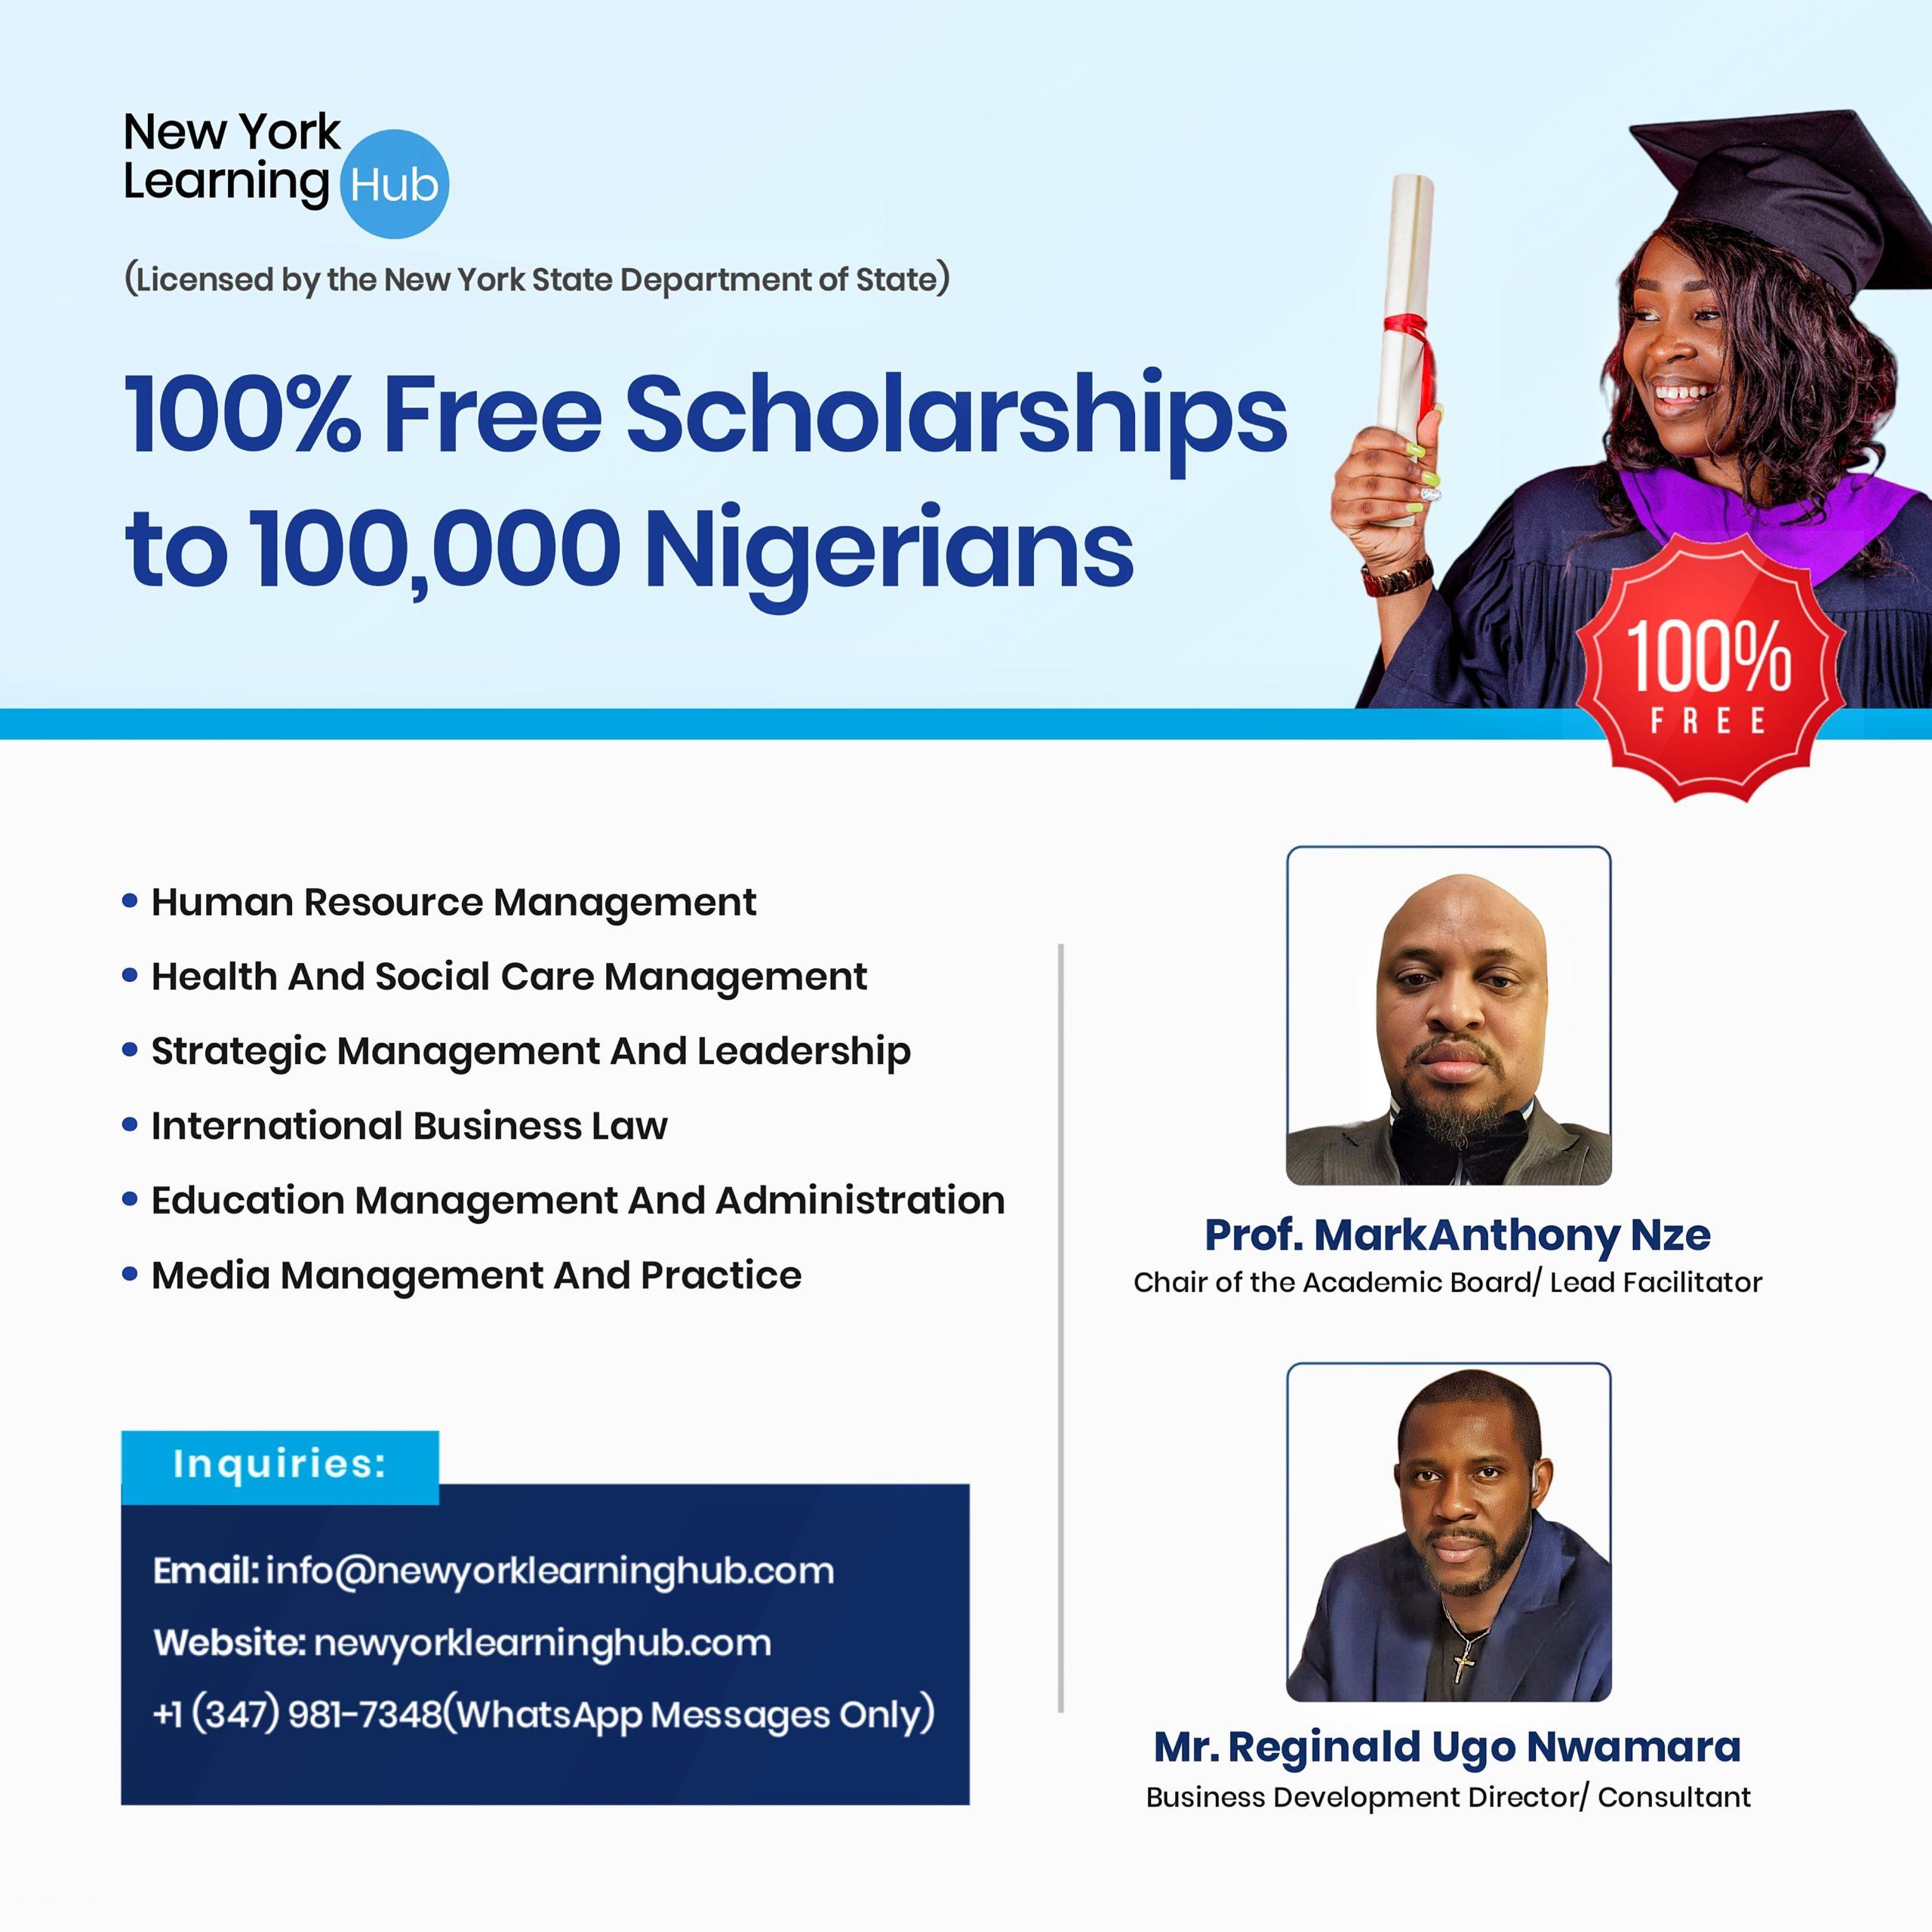 Scholarships For 100,000 Nigerians At New York Learning Hub